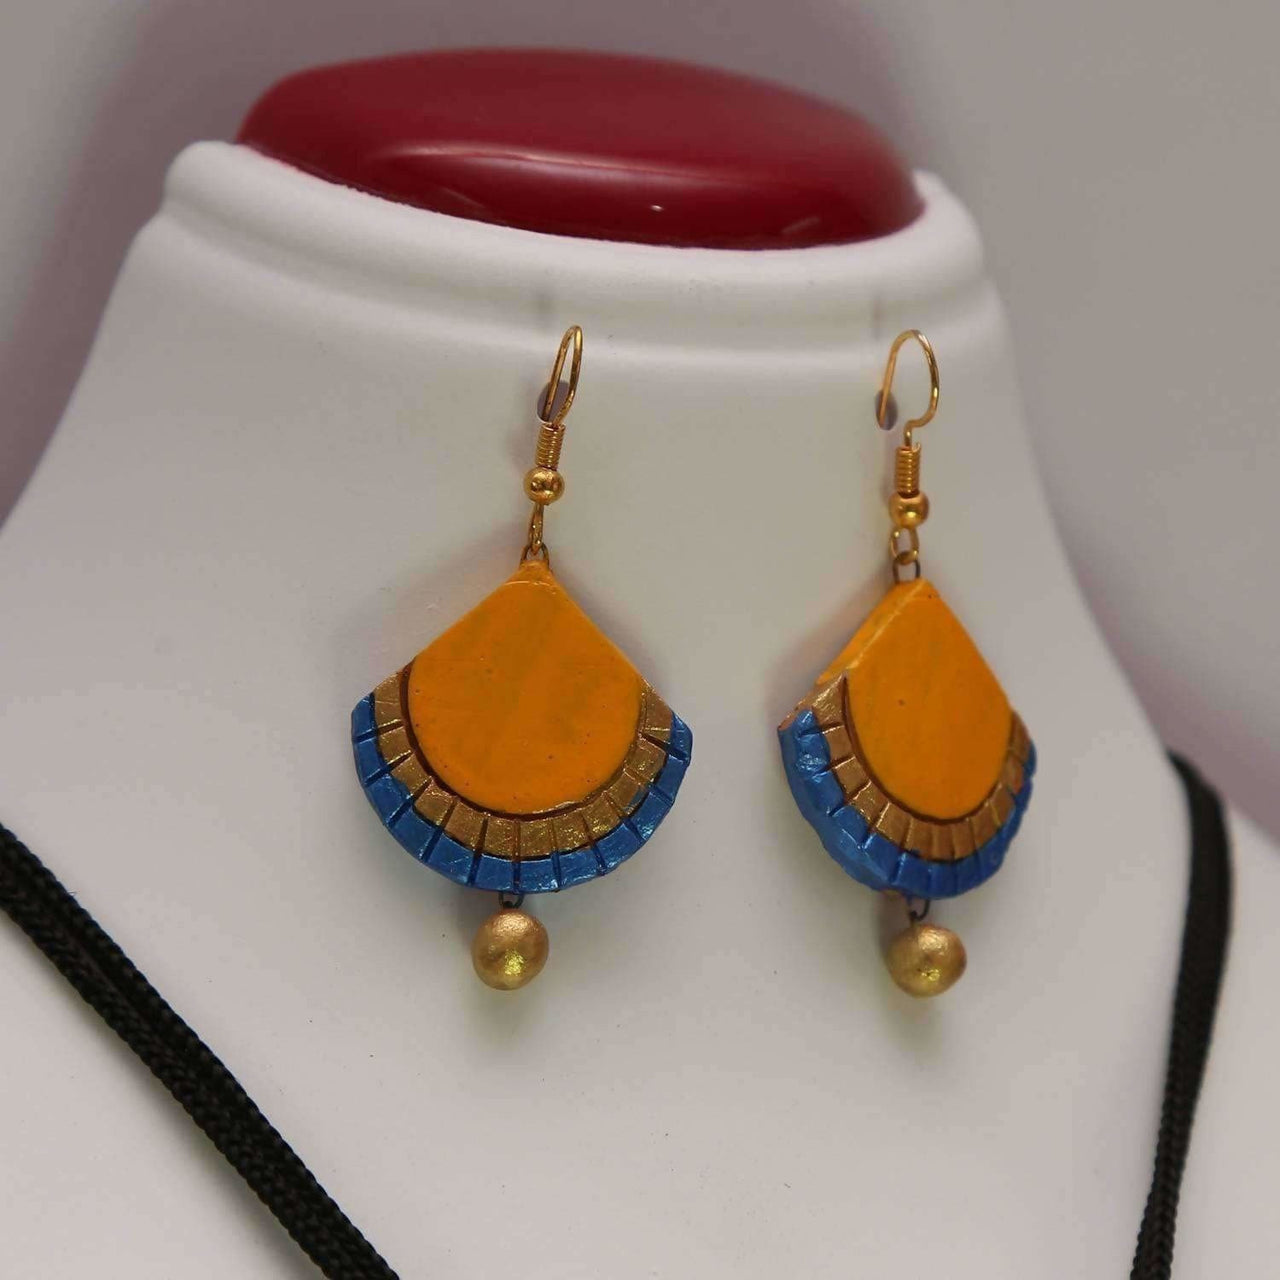 Terracotta Jewelry Golden Beads with Multicolored Collection